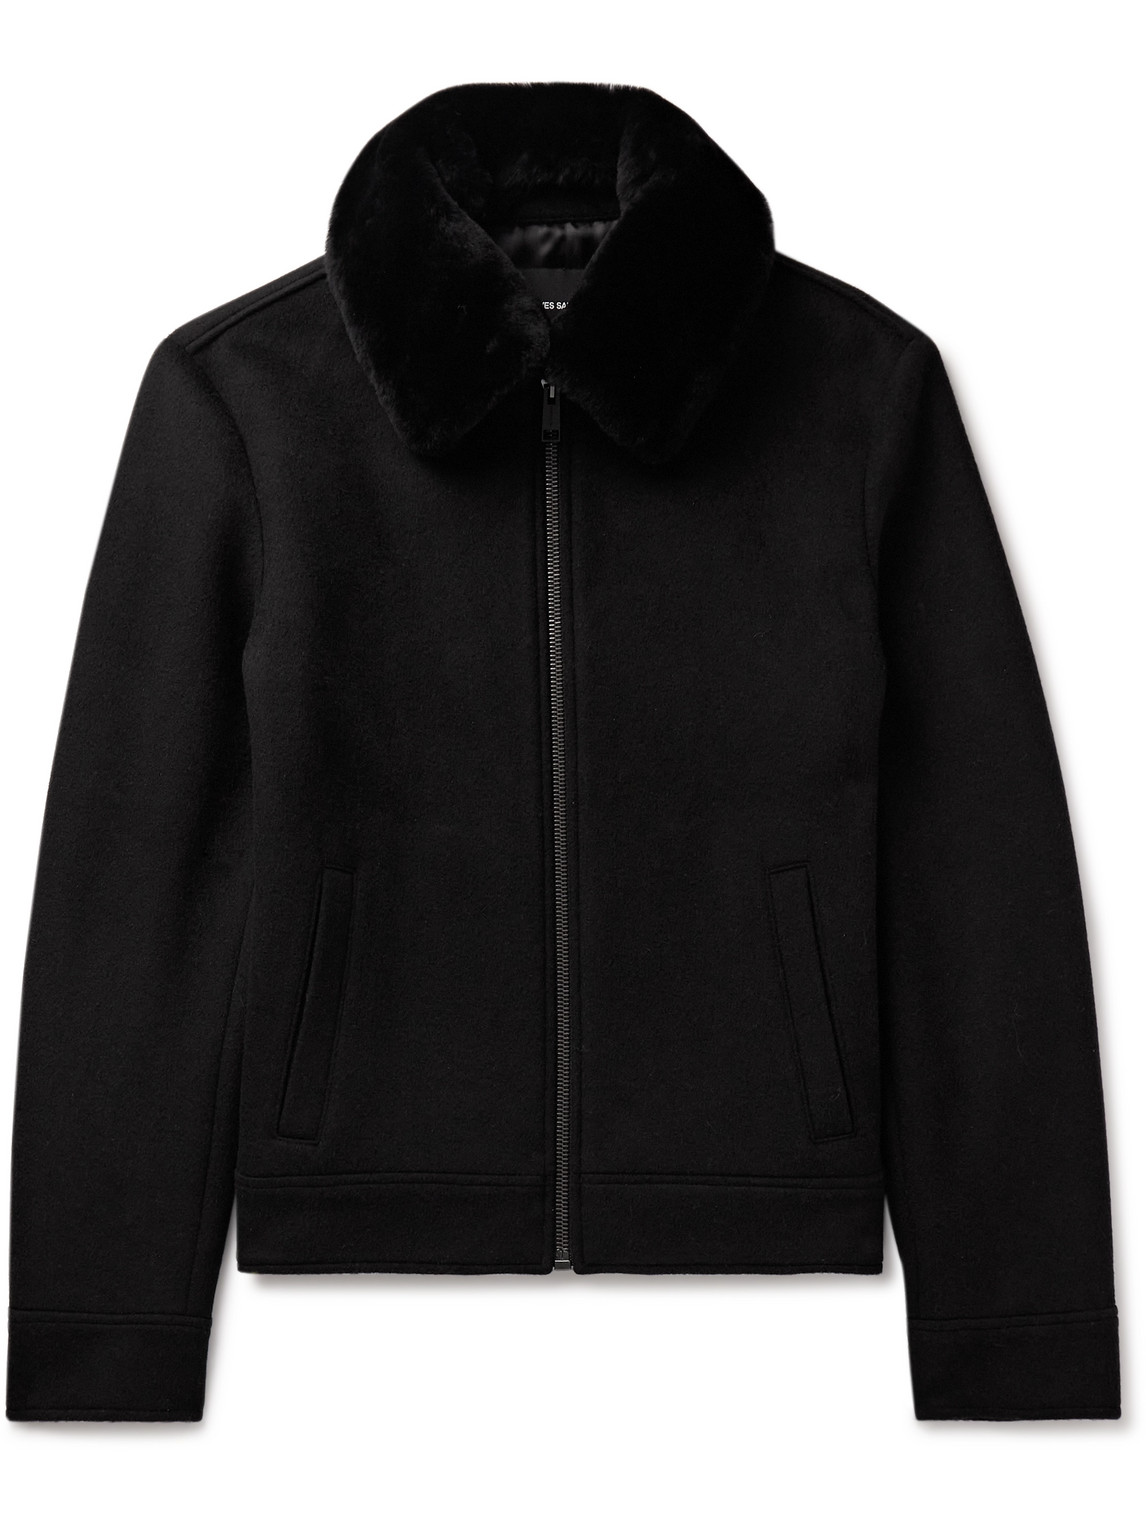 Shearling-Trimmed Wool and Cashmere-Blend Jacket